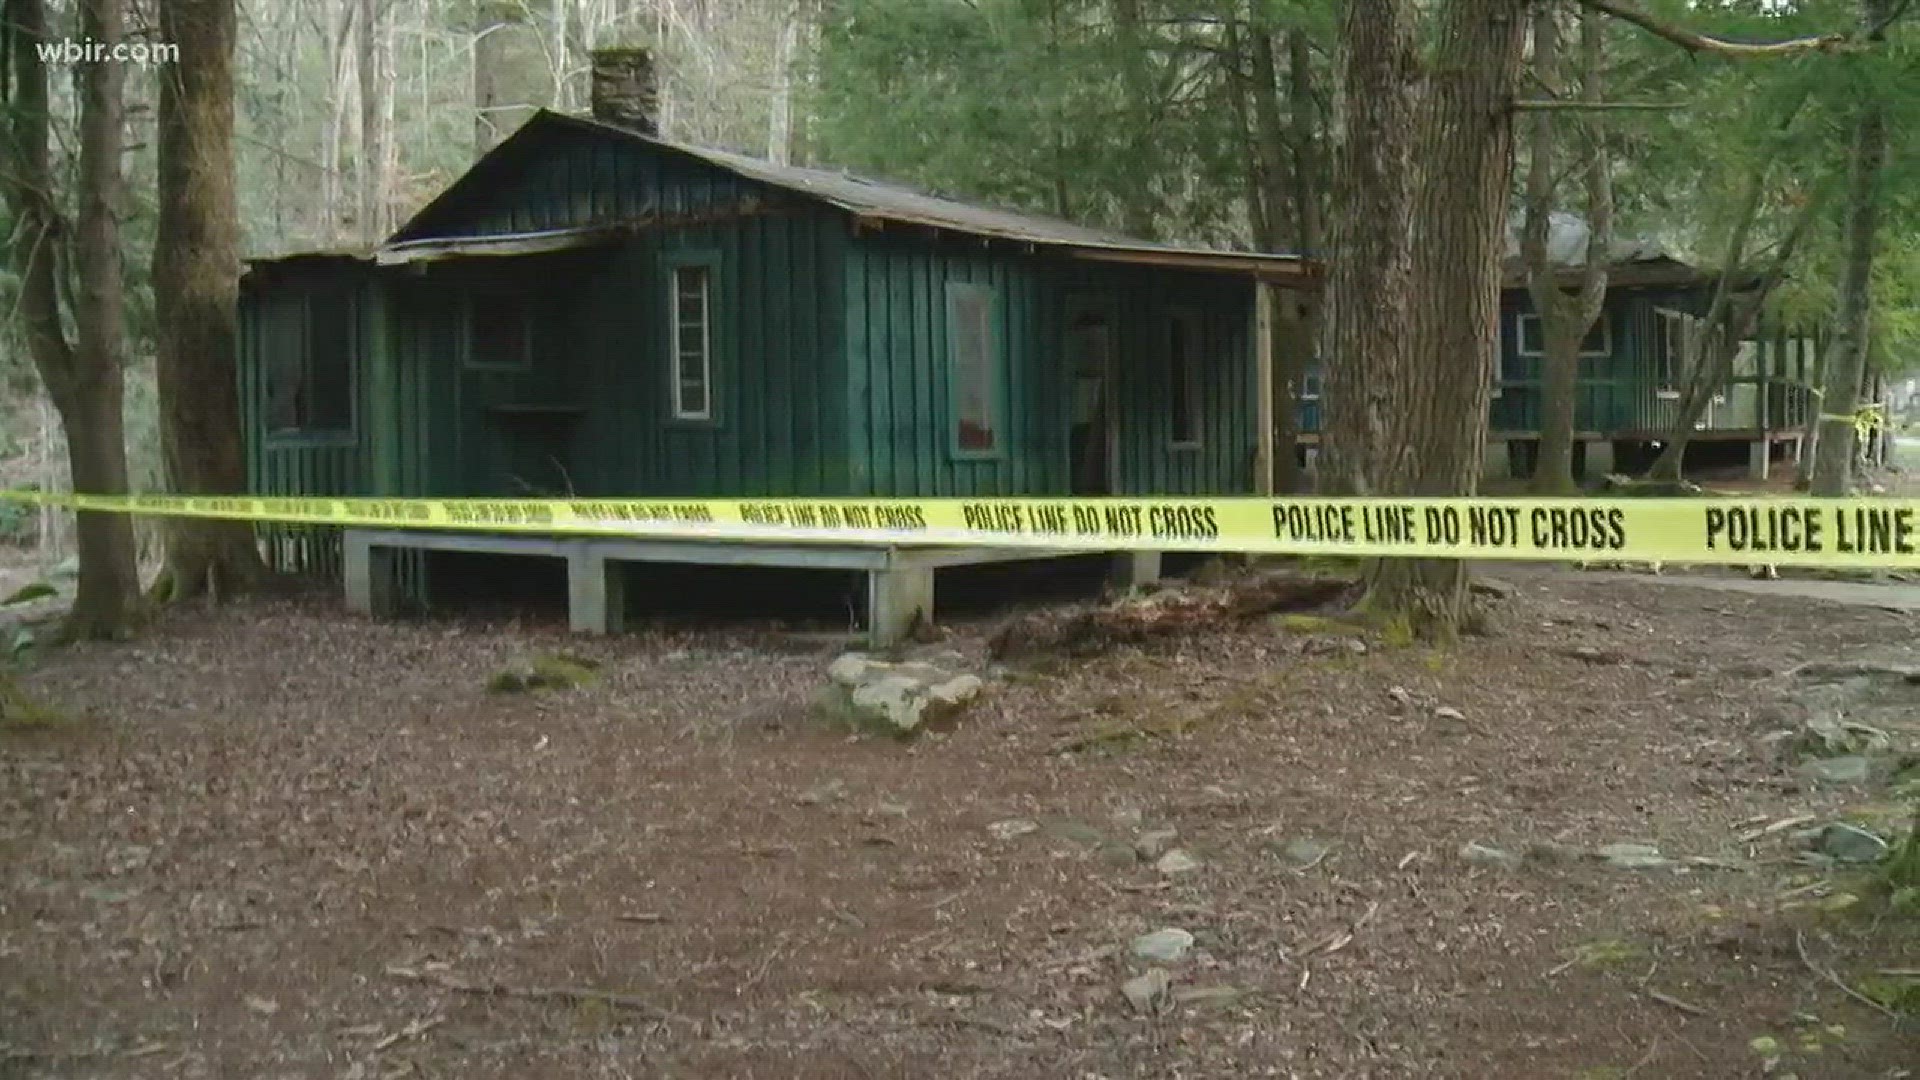 Park service investigators are asking for help finding out who set the fire to the historic cabin in the Great Smoky Mountains. The cabin is set to be restored in the next few years, along with several others.